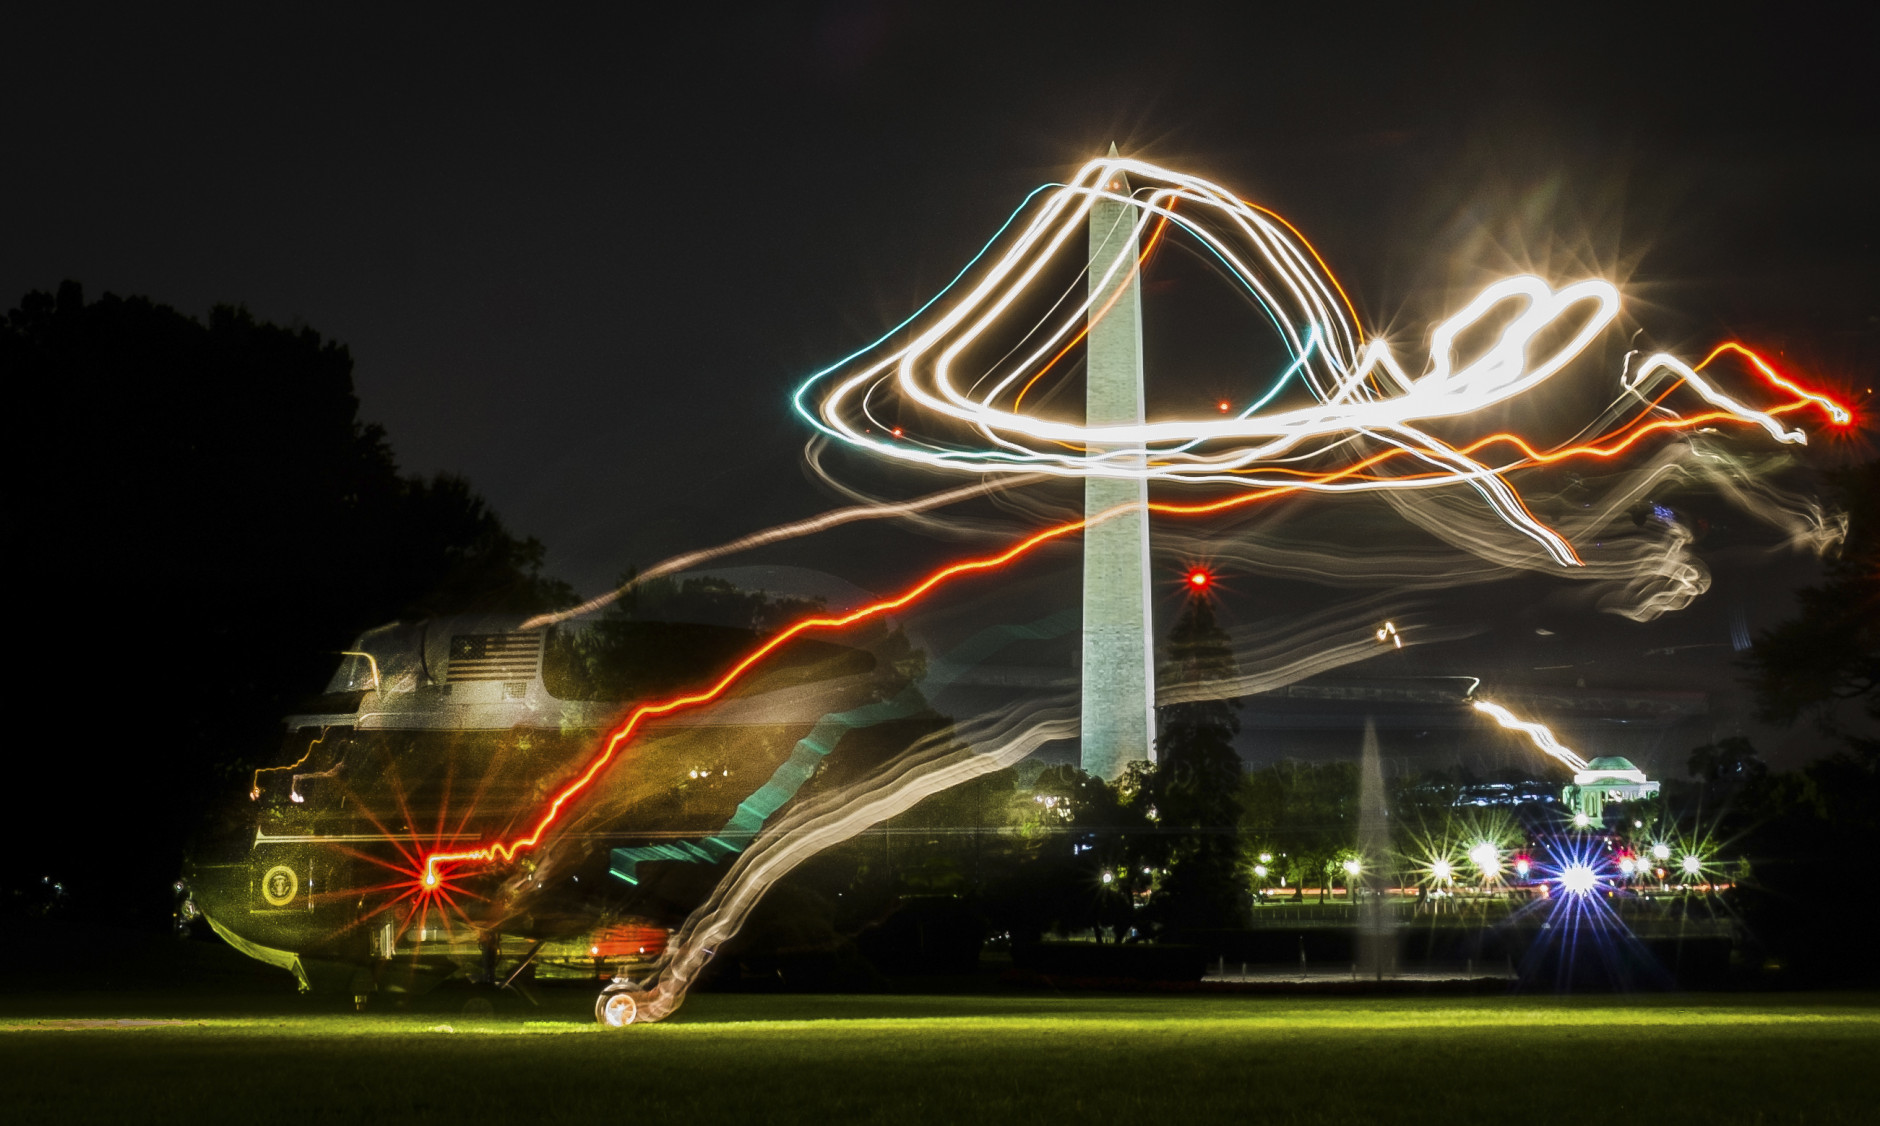 FOR USE AS DESIRED, YEAR END PHOTOS - FILE - A time exposure shows the path of Marine One as it lands on the South Lawn of the White House in Washington with President Barack Obama aboard, Thursday, July 24, 2014. (AP Photo/J. David Ake, File)